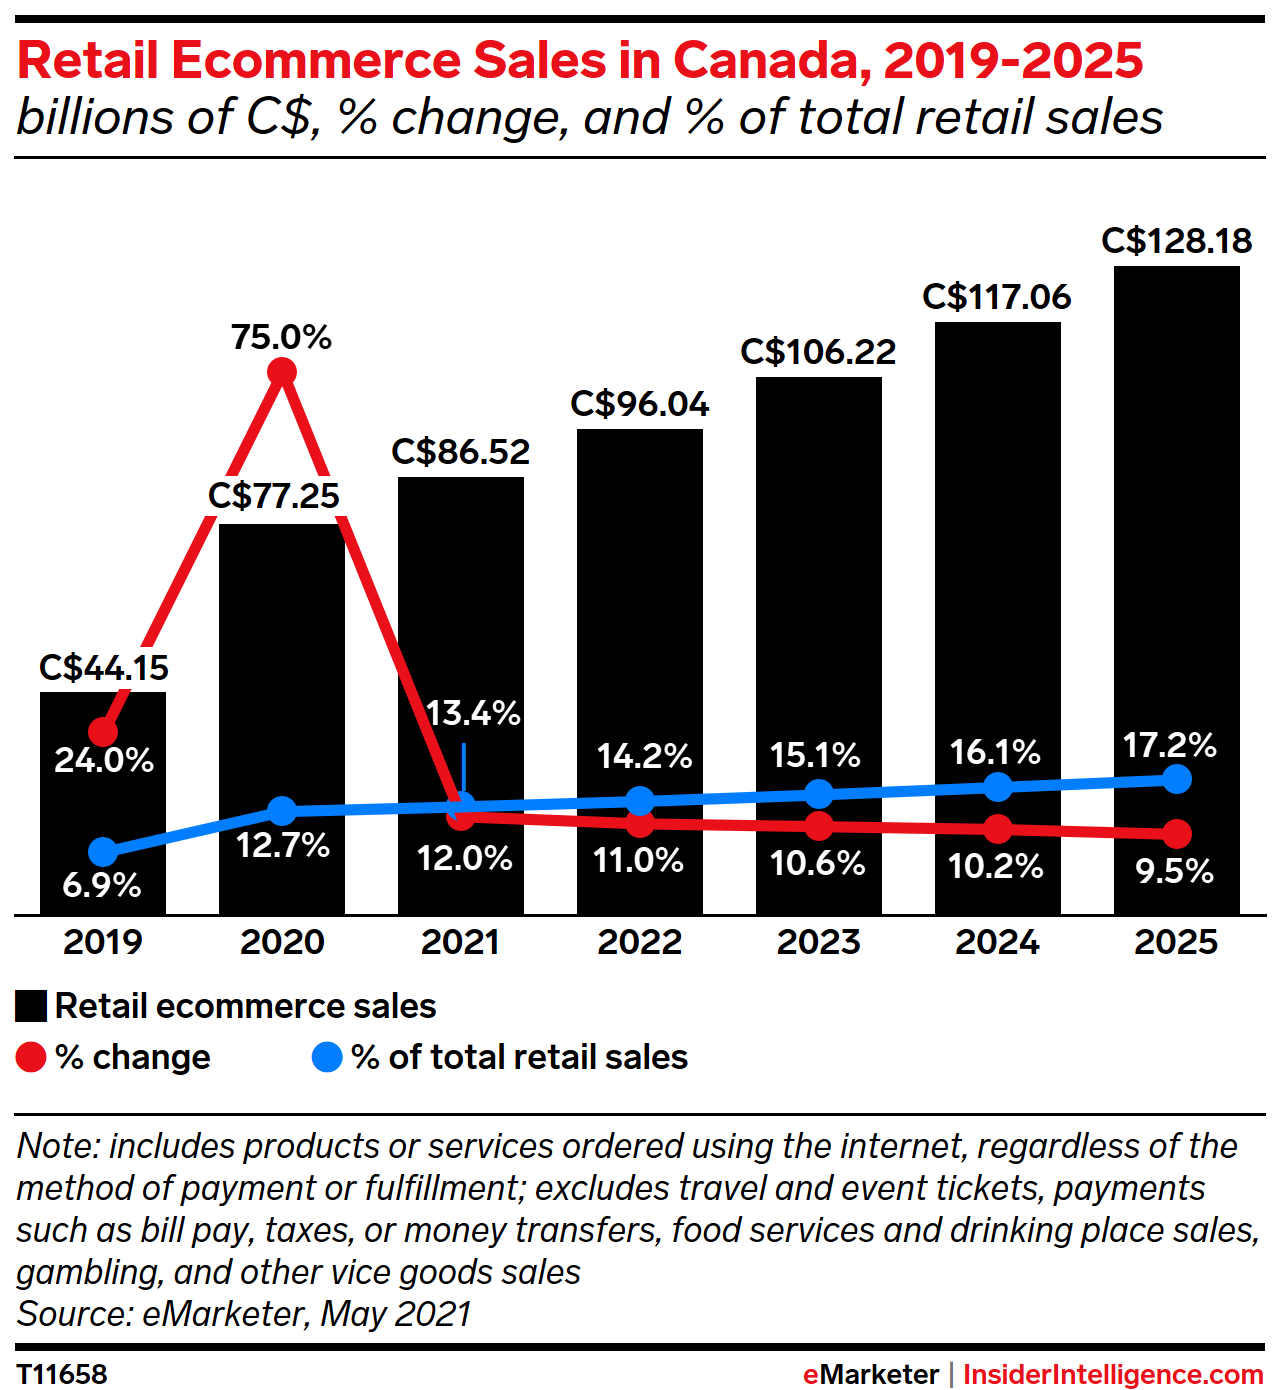 Retail Ecommerce Sales in Canada, 2019-2025 (billions of C$, % change, and % of total retail sales)